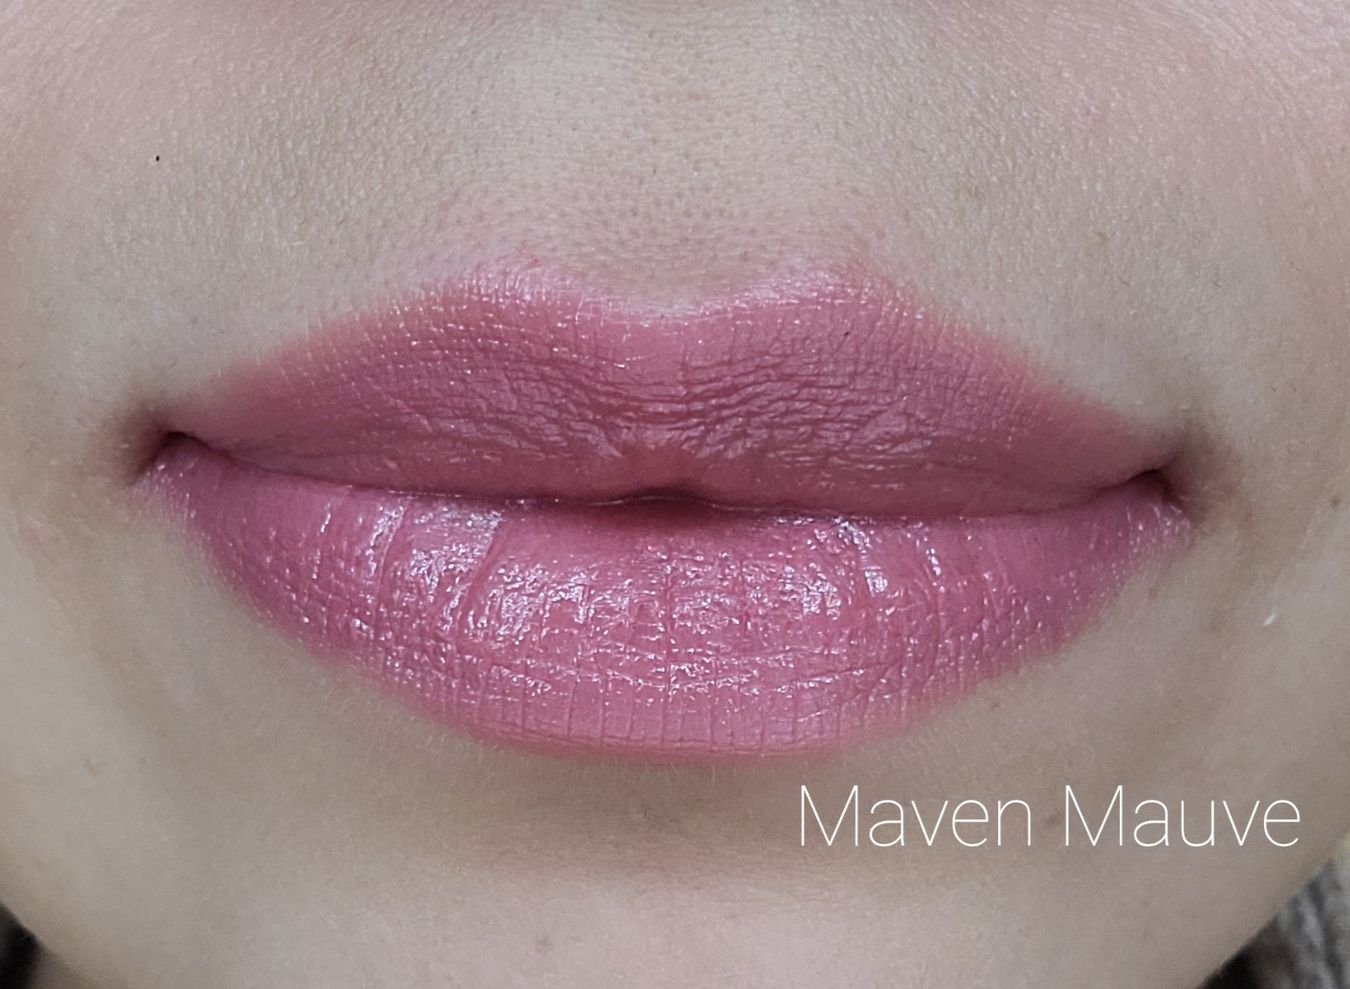 Image of close up lips with lipstick in the shade called Maven Mauve. This shade is perfect blend between dusty rose and mauve. Gorgeous and light with no shimmer